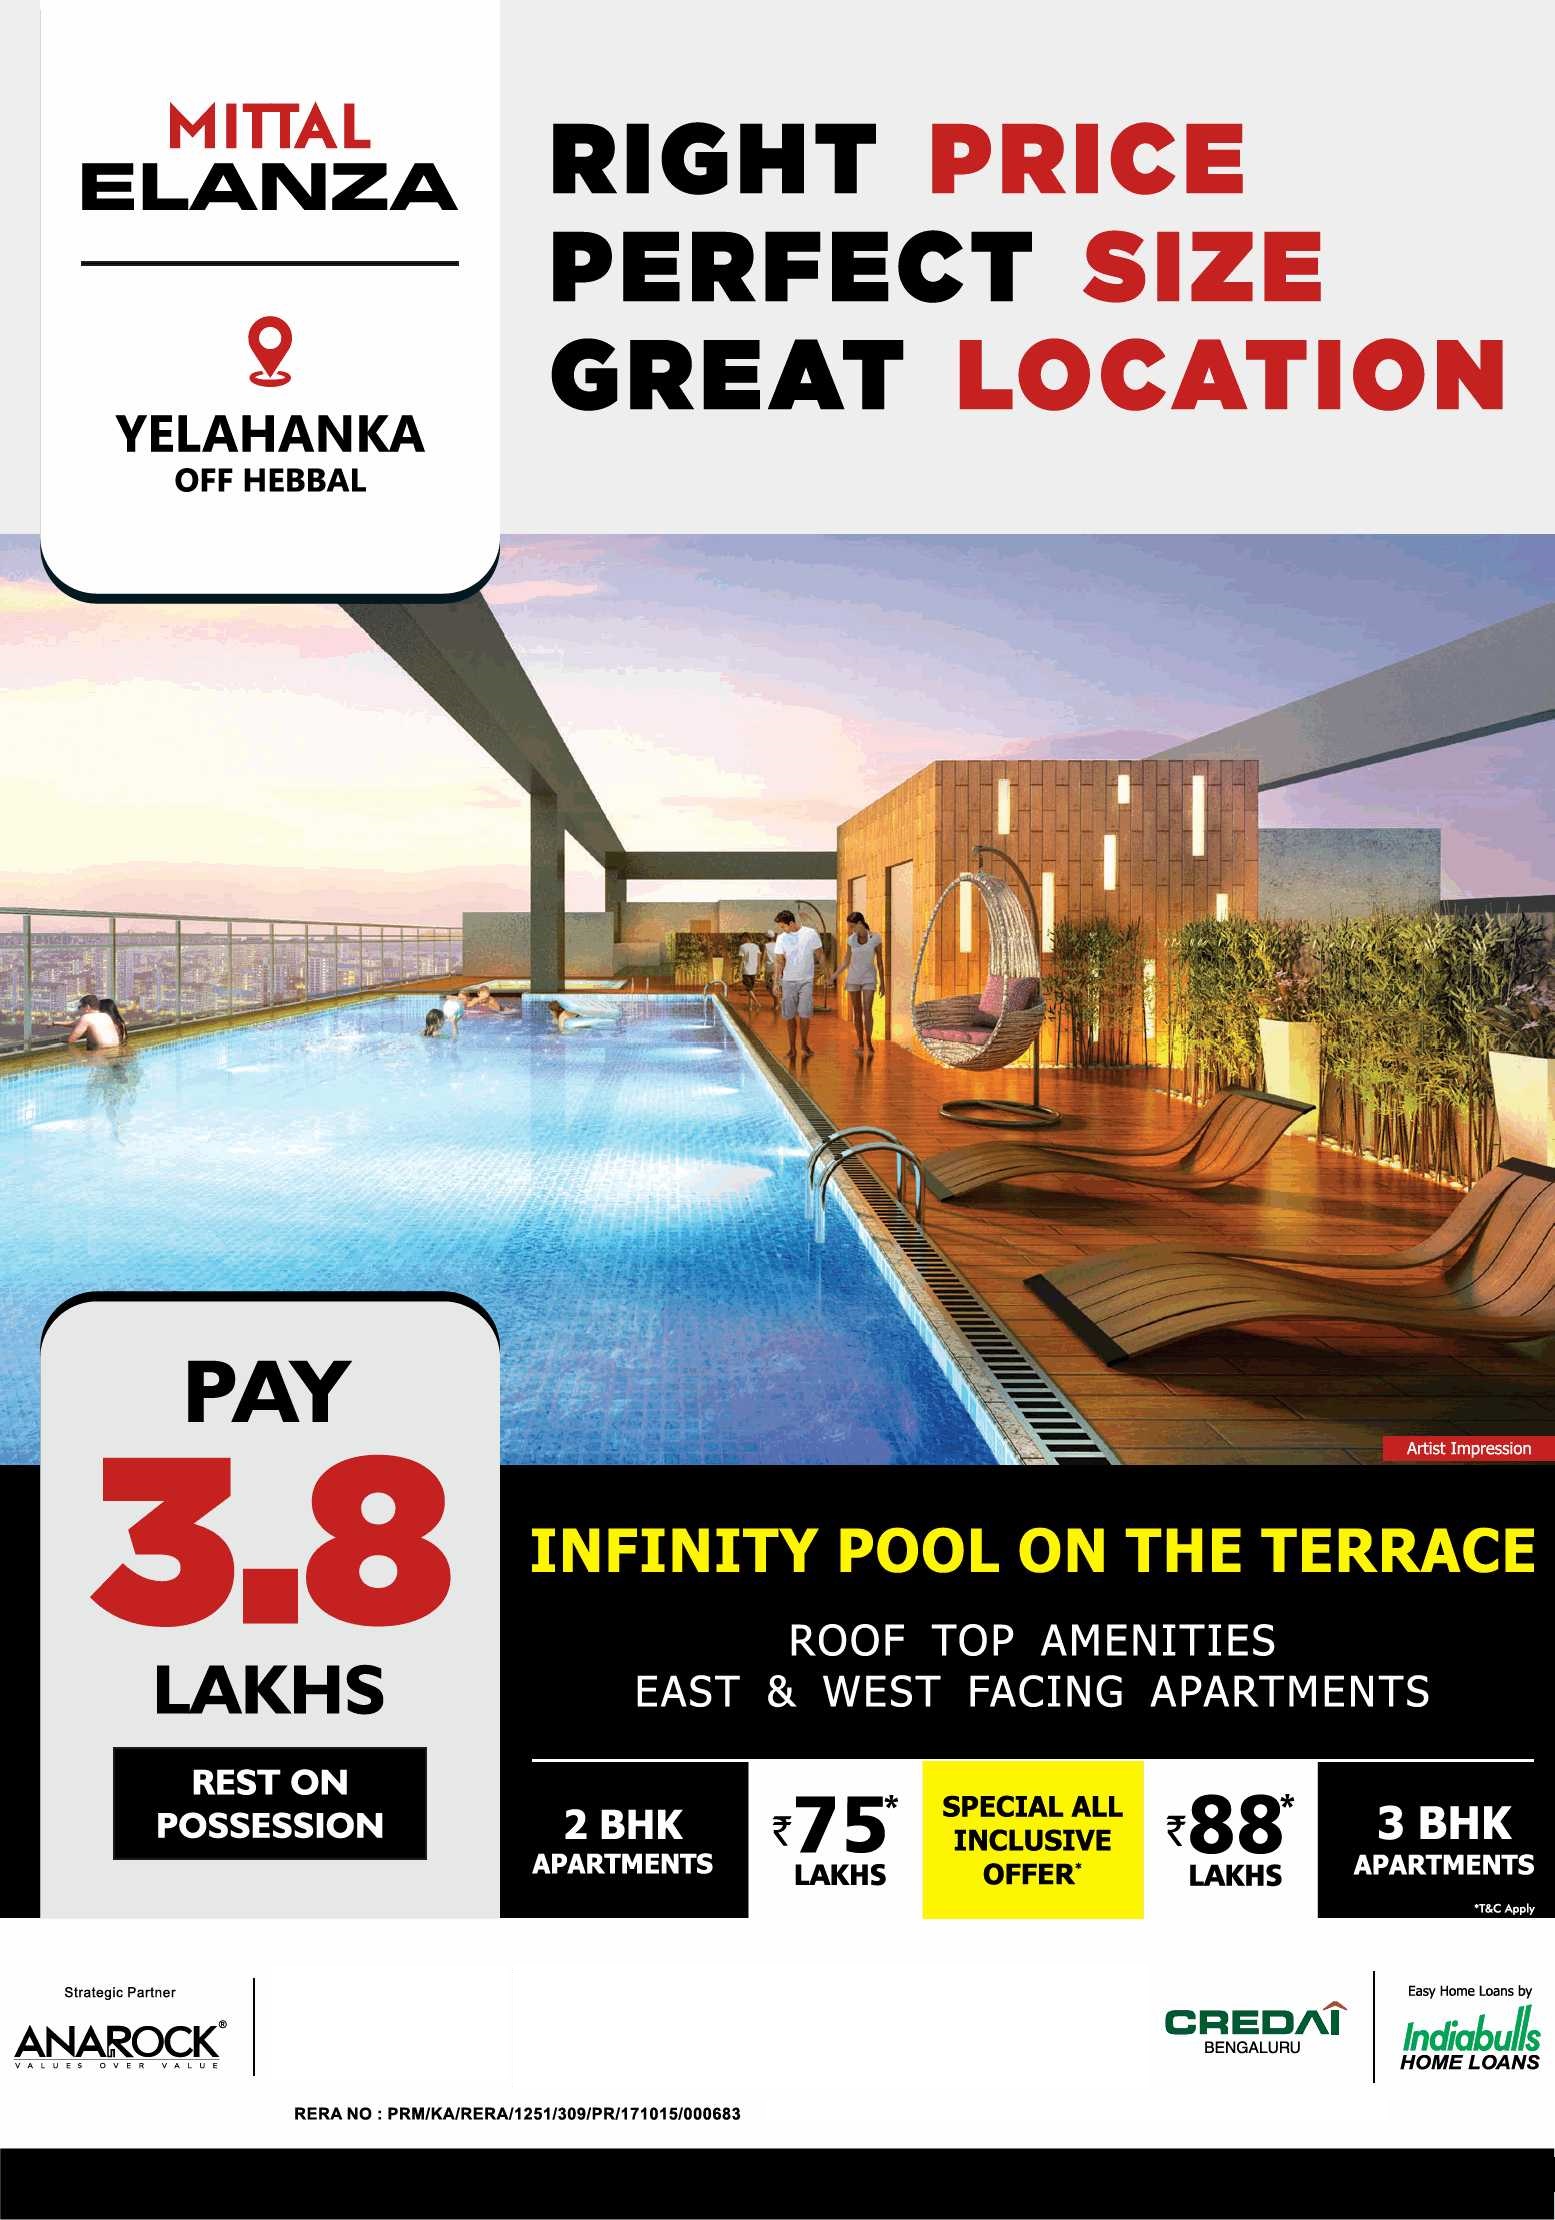 Book apartments with infinity pool on the terrace at Mittal Elanza in  Bangalore